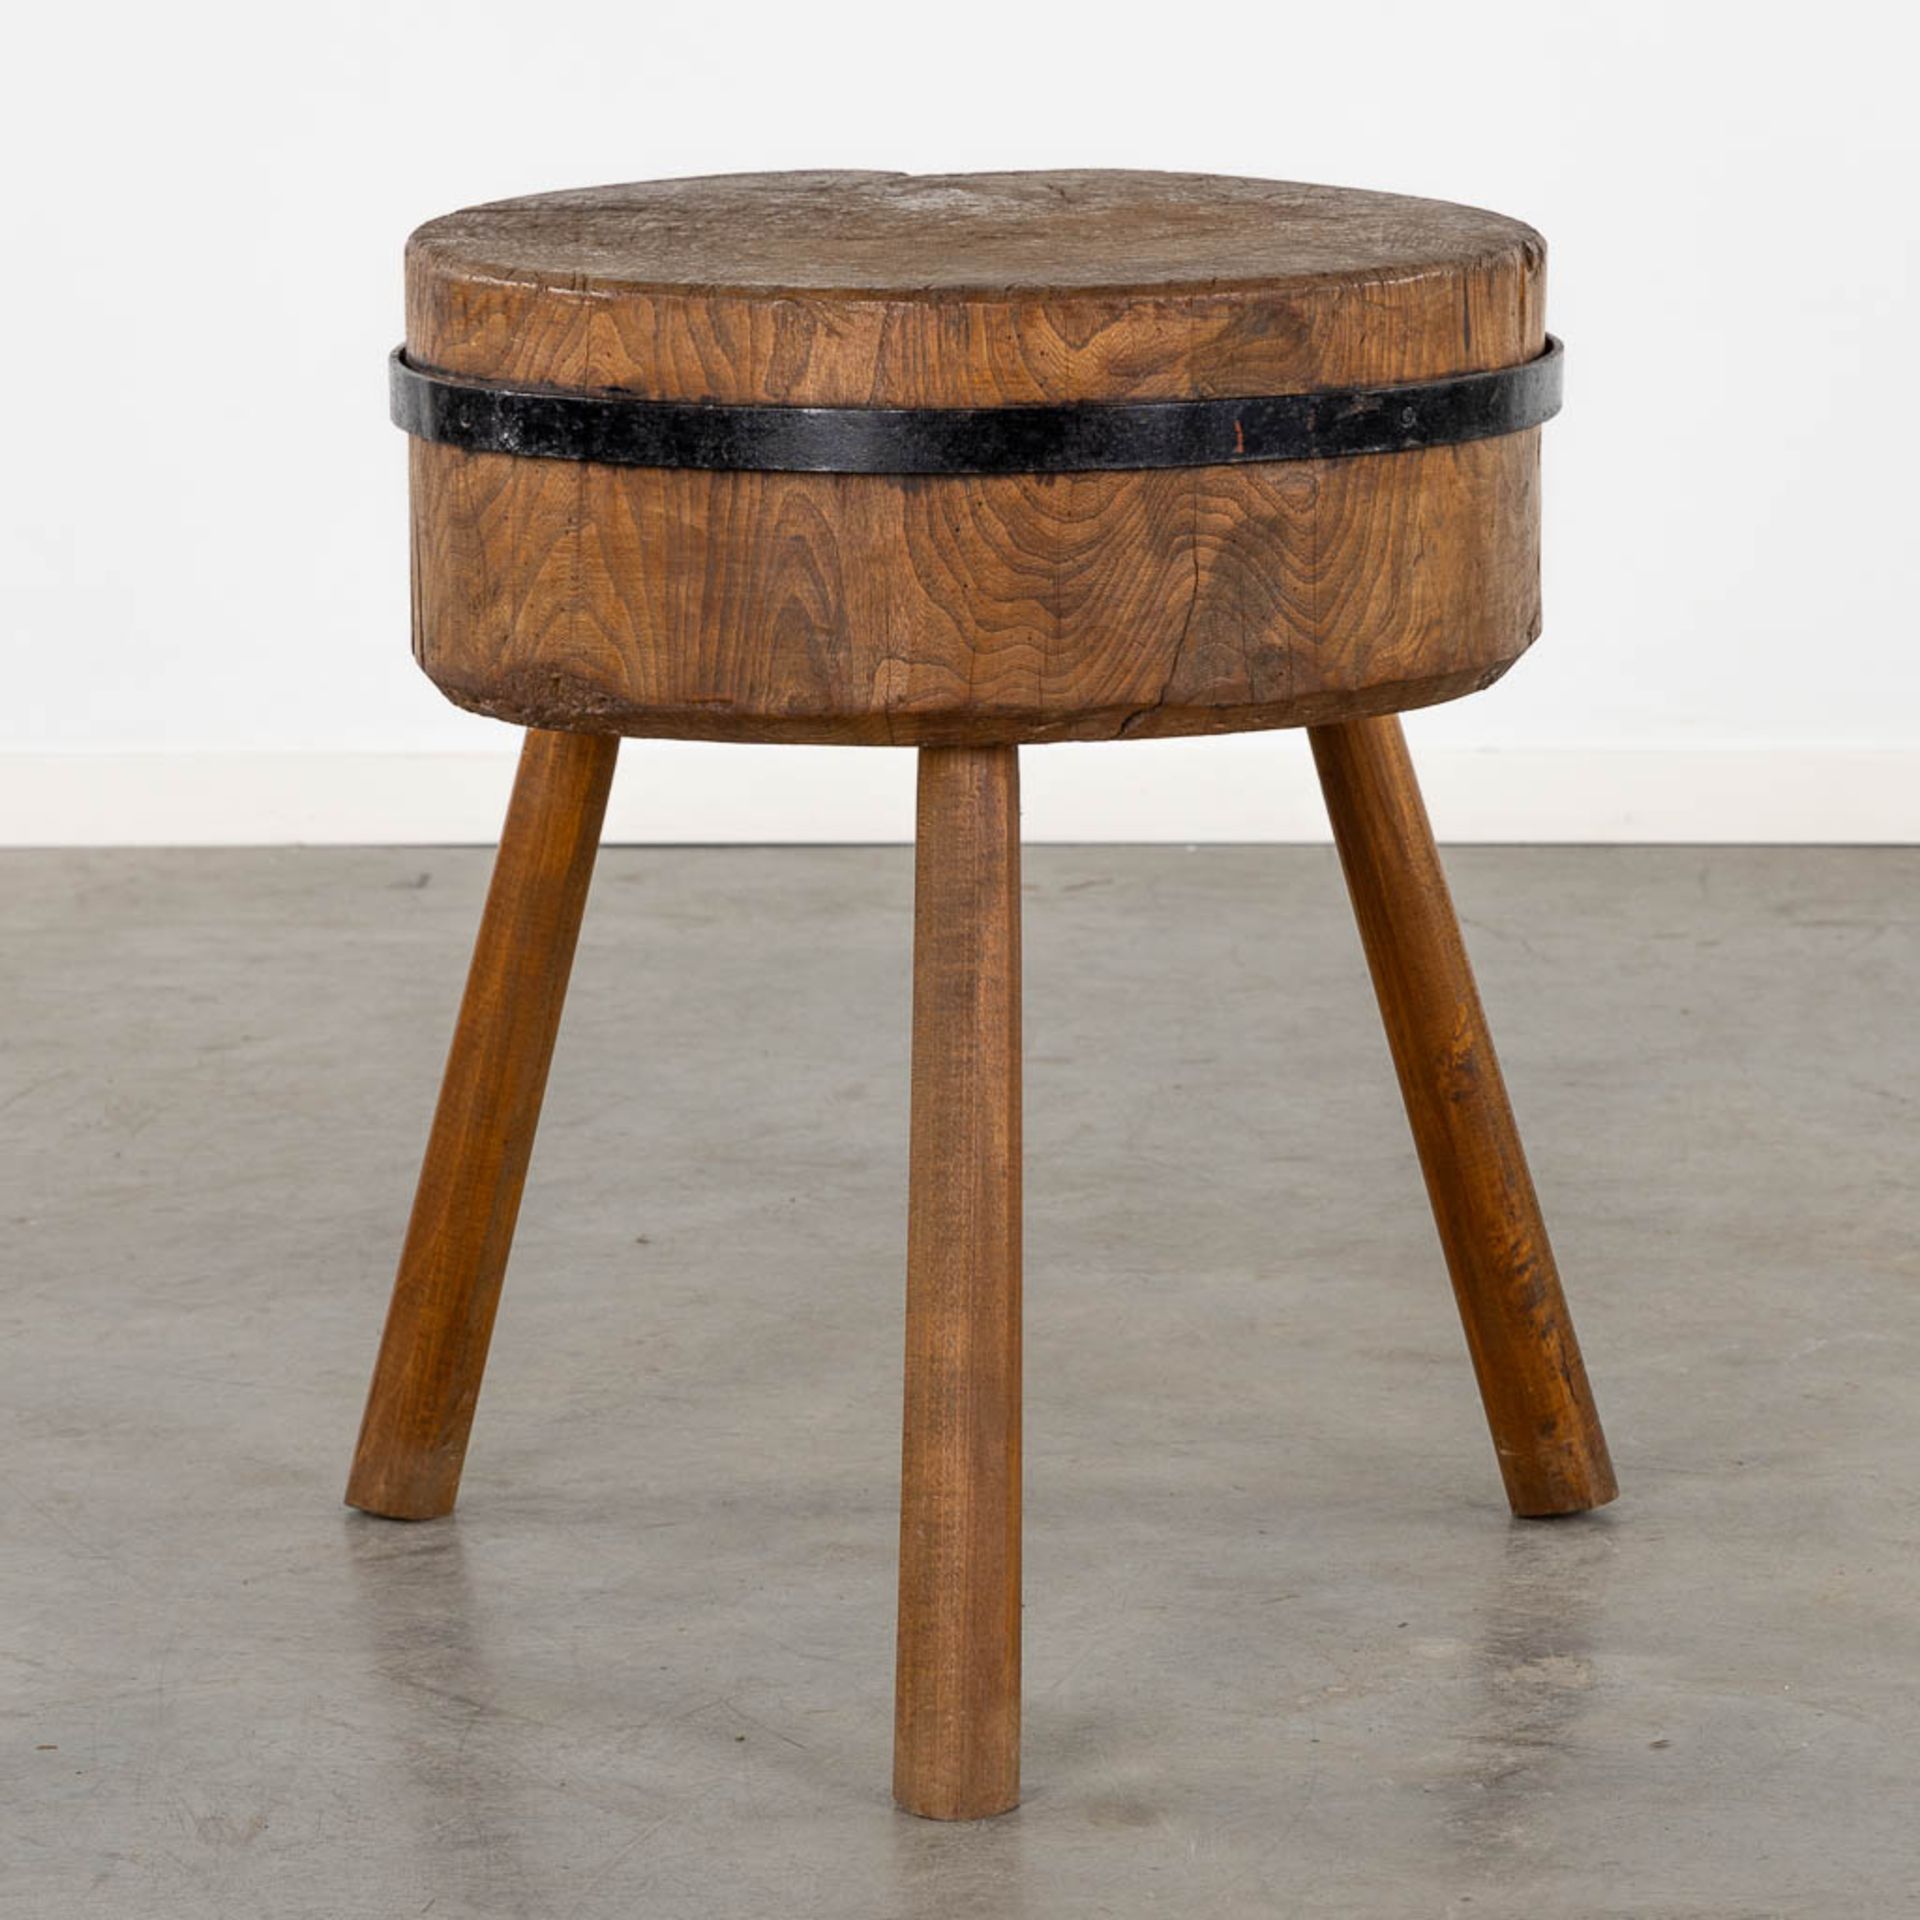 A small and antique 'Butcher's block', standing on three legs. (H:68 x D:56 cm)